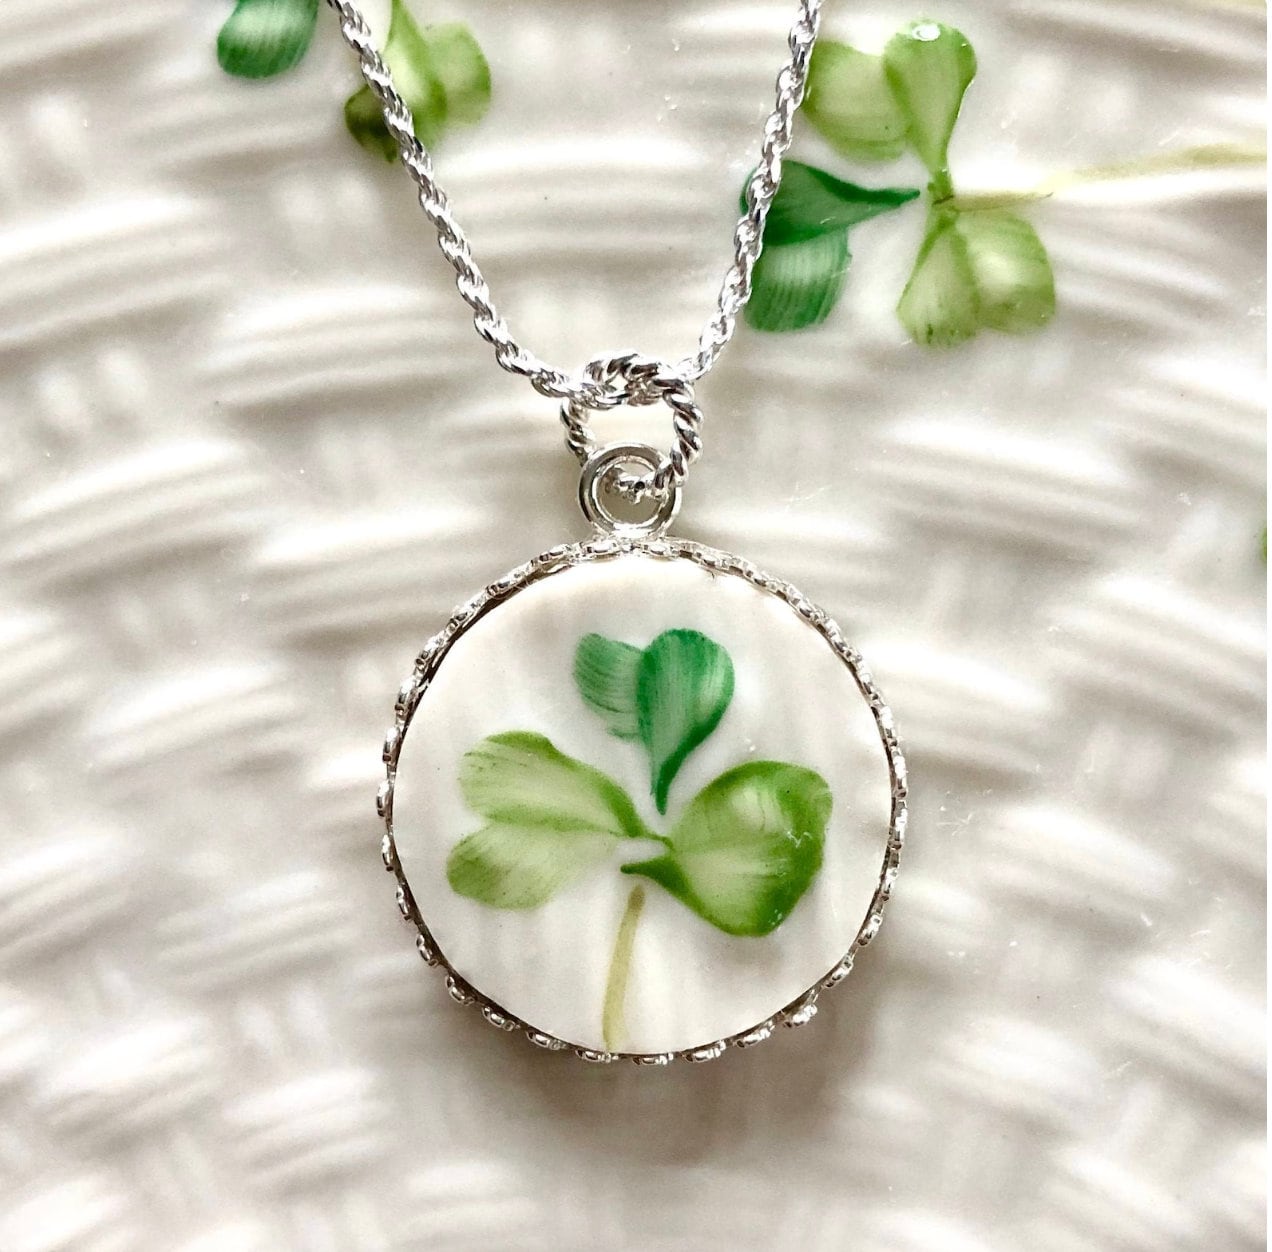 Celtic Necklace, Irish Belleek Broken China Jewelry, Sterling Silver 20th Anniversary Gift for Wife, Unique Gifts for Women, St Patricks Day